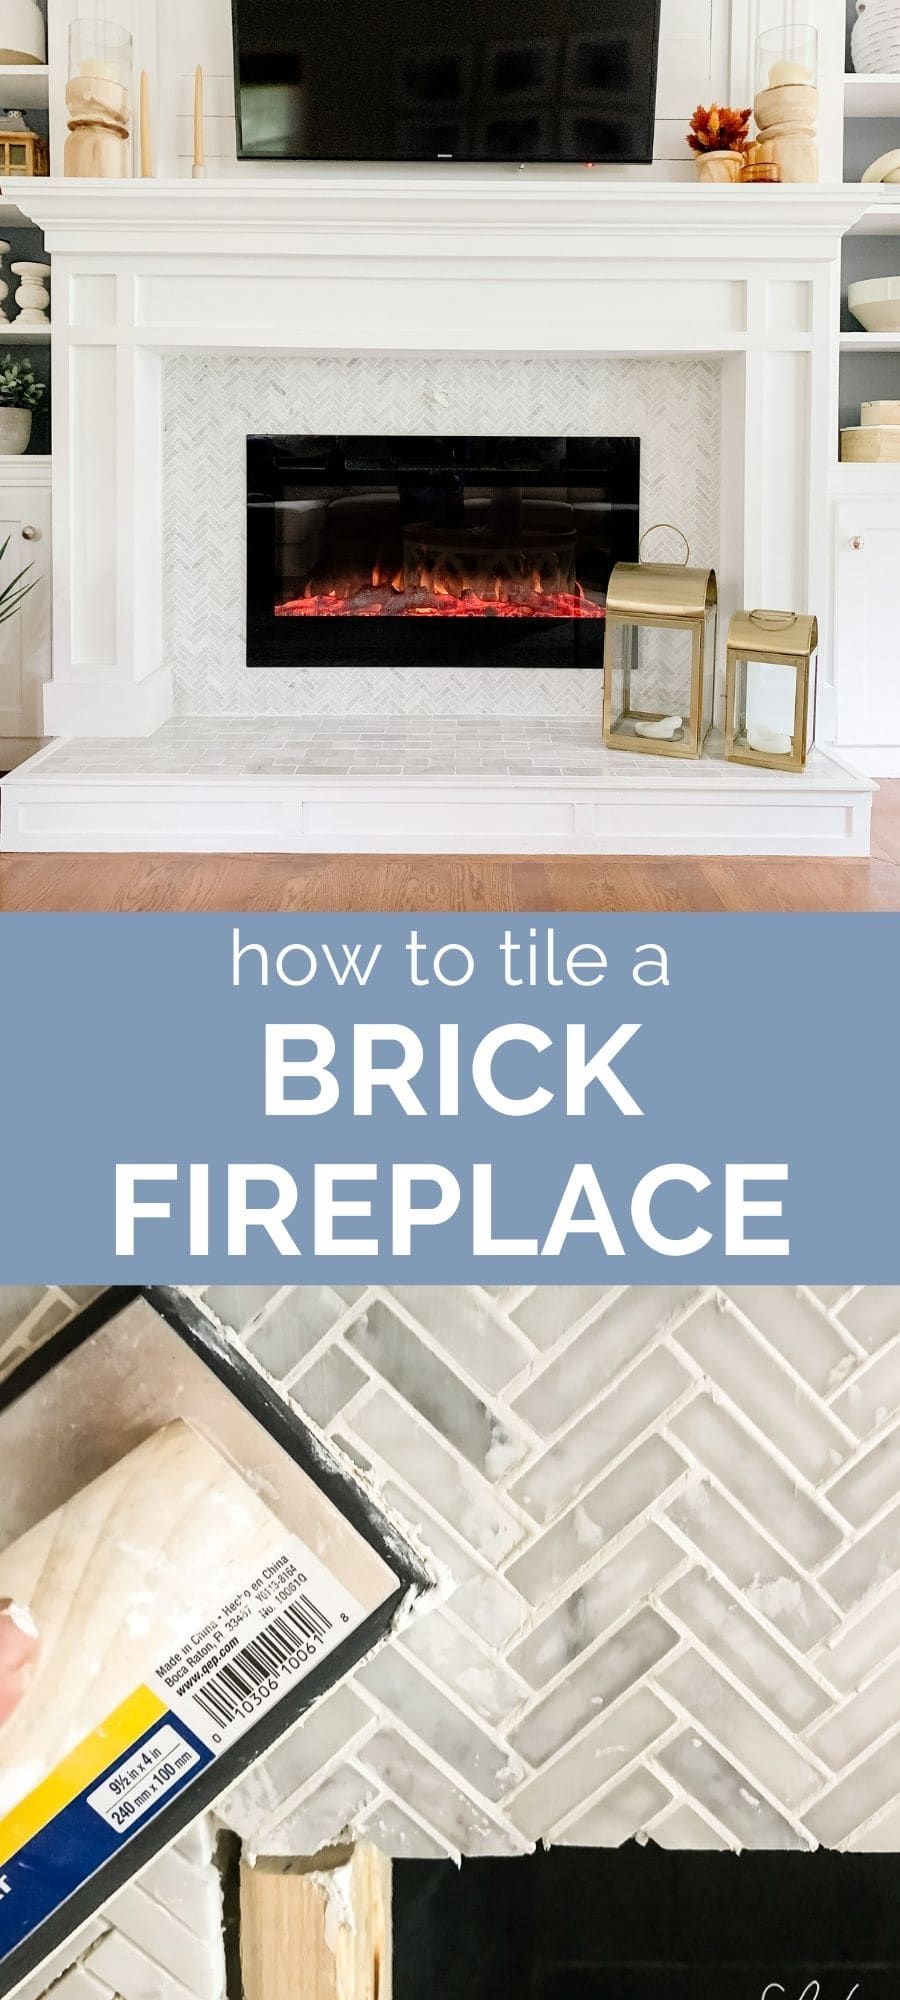 How To Tile A Brick Fireplace Jenna, How To Replace Tile On A Fireplace